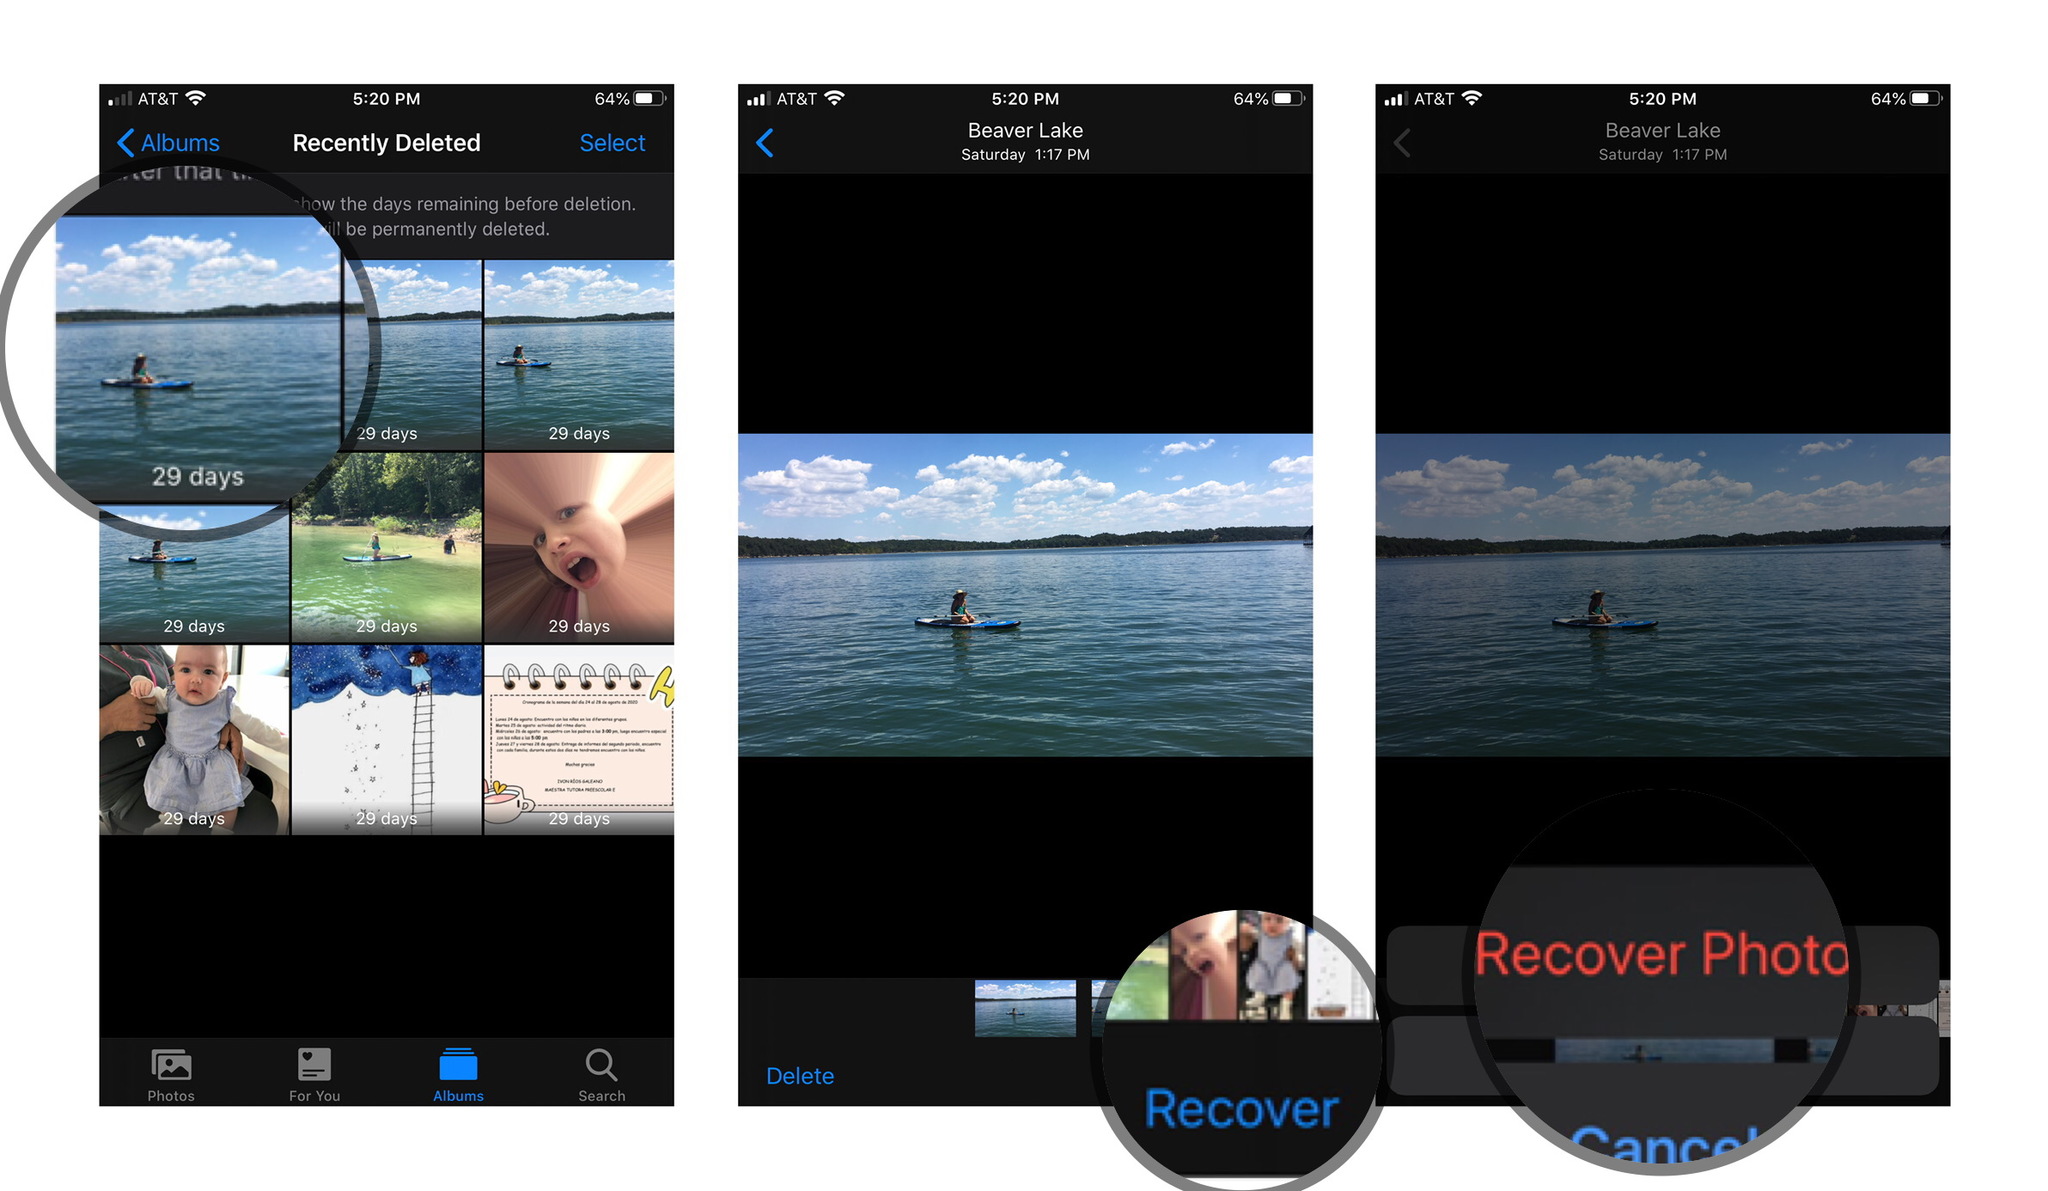 How to recover deleted photos: Tap Recover and confirm